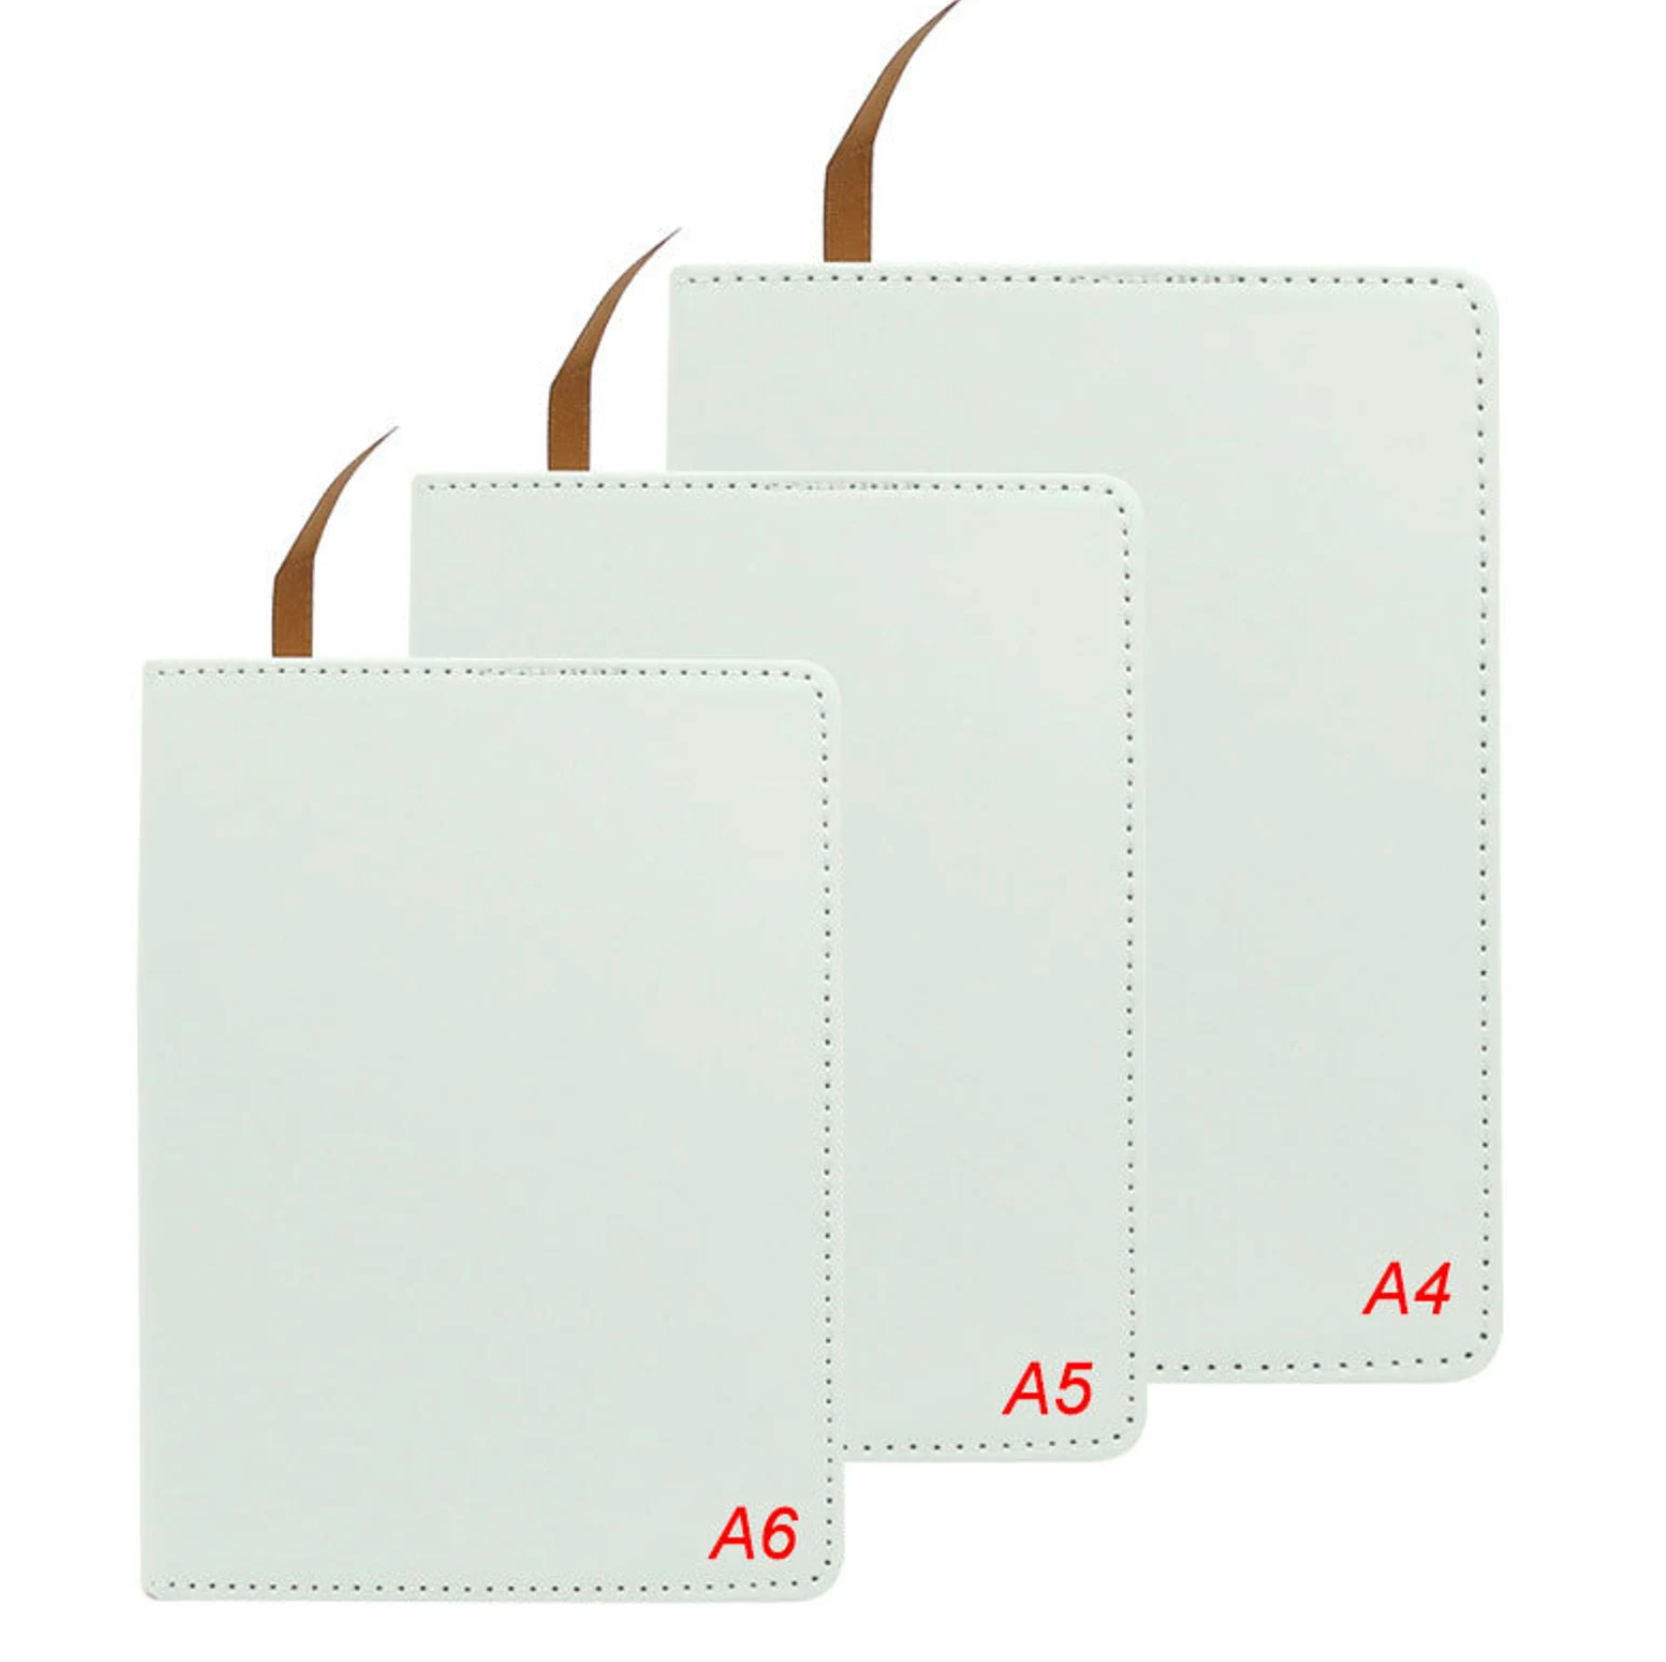 Dye Sublimation Blank Imprintable Leather Notebook. Call LRi Today